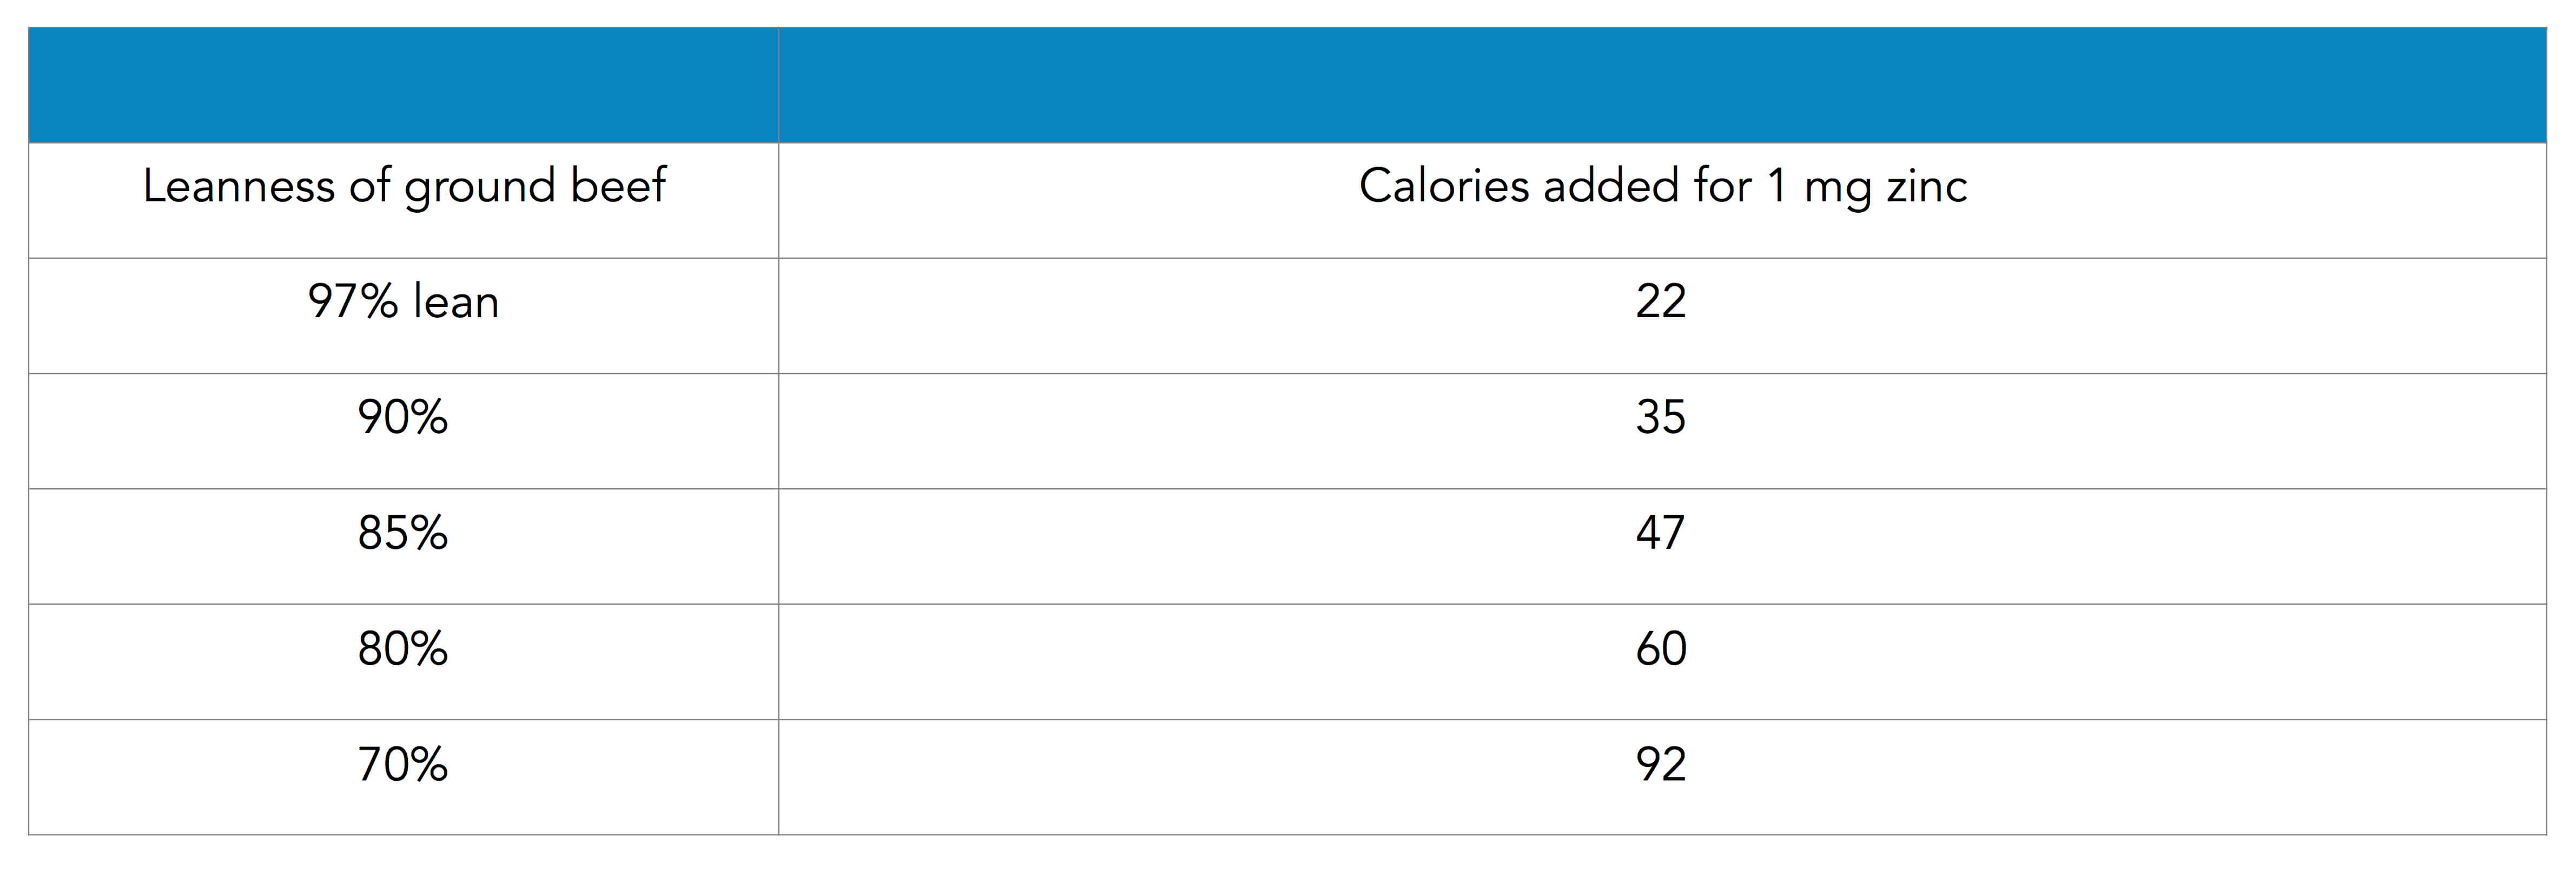 Table 3: Calories (kcal) Added For Every 1 mg Zn Leanness of ground beef Calories added for 1 mg zinc 97% lean 22 90% 35 85% 47 80% 60 70% 92